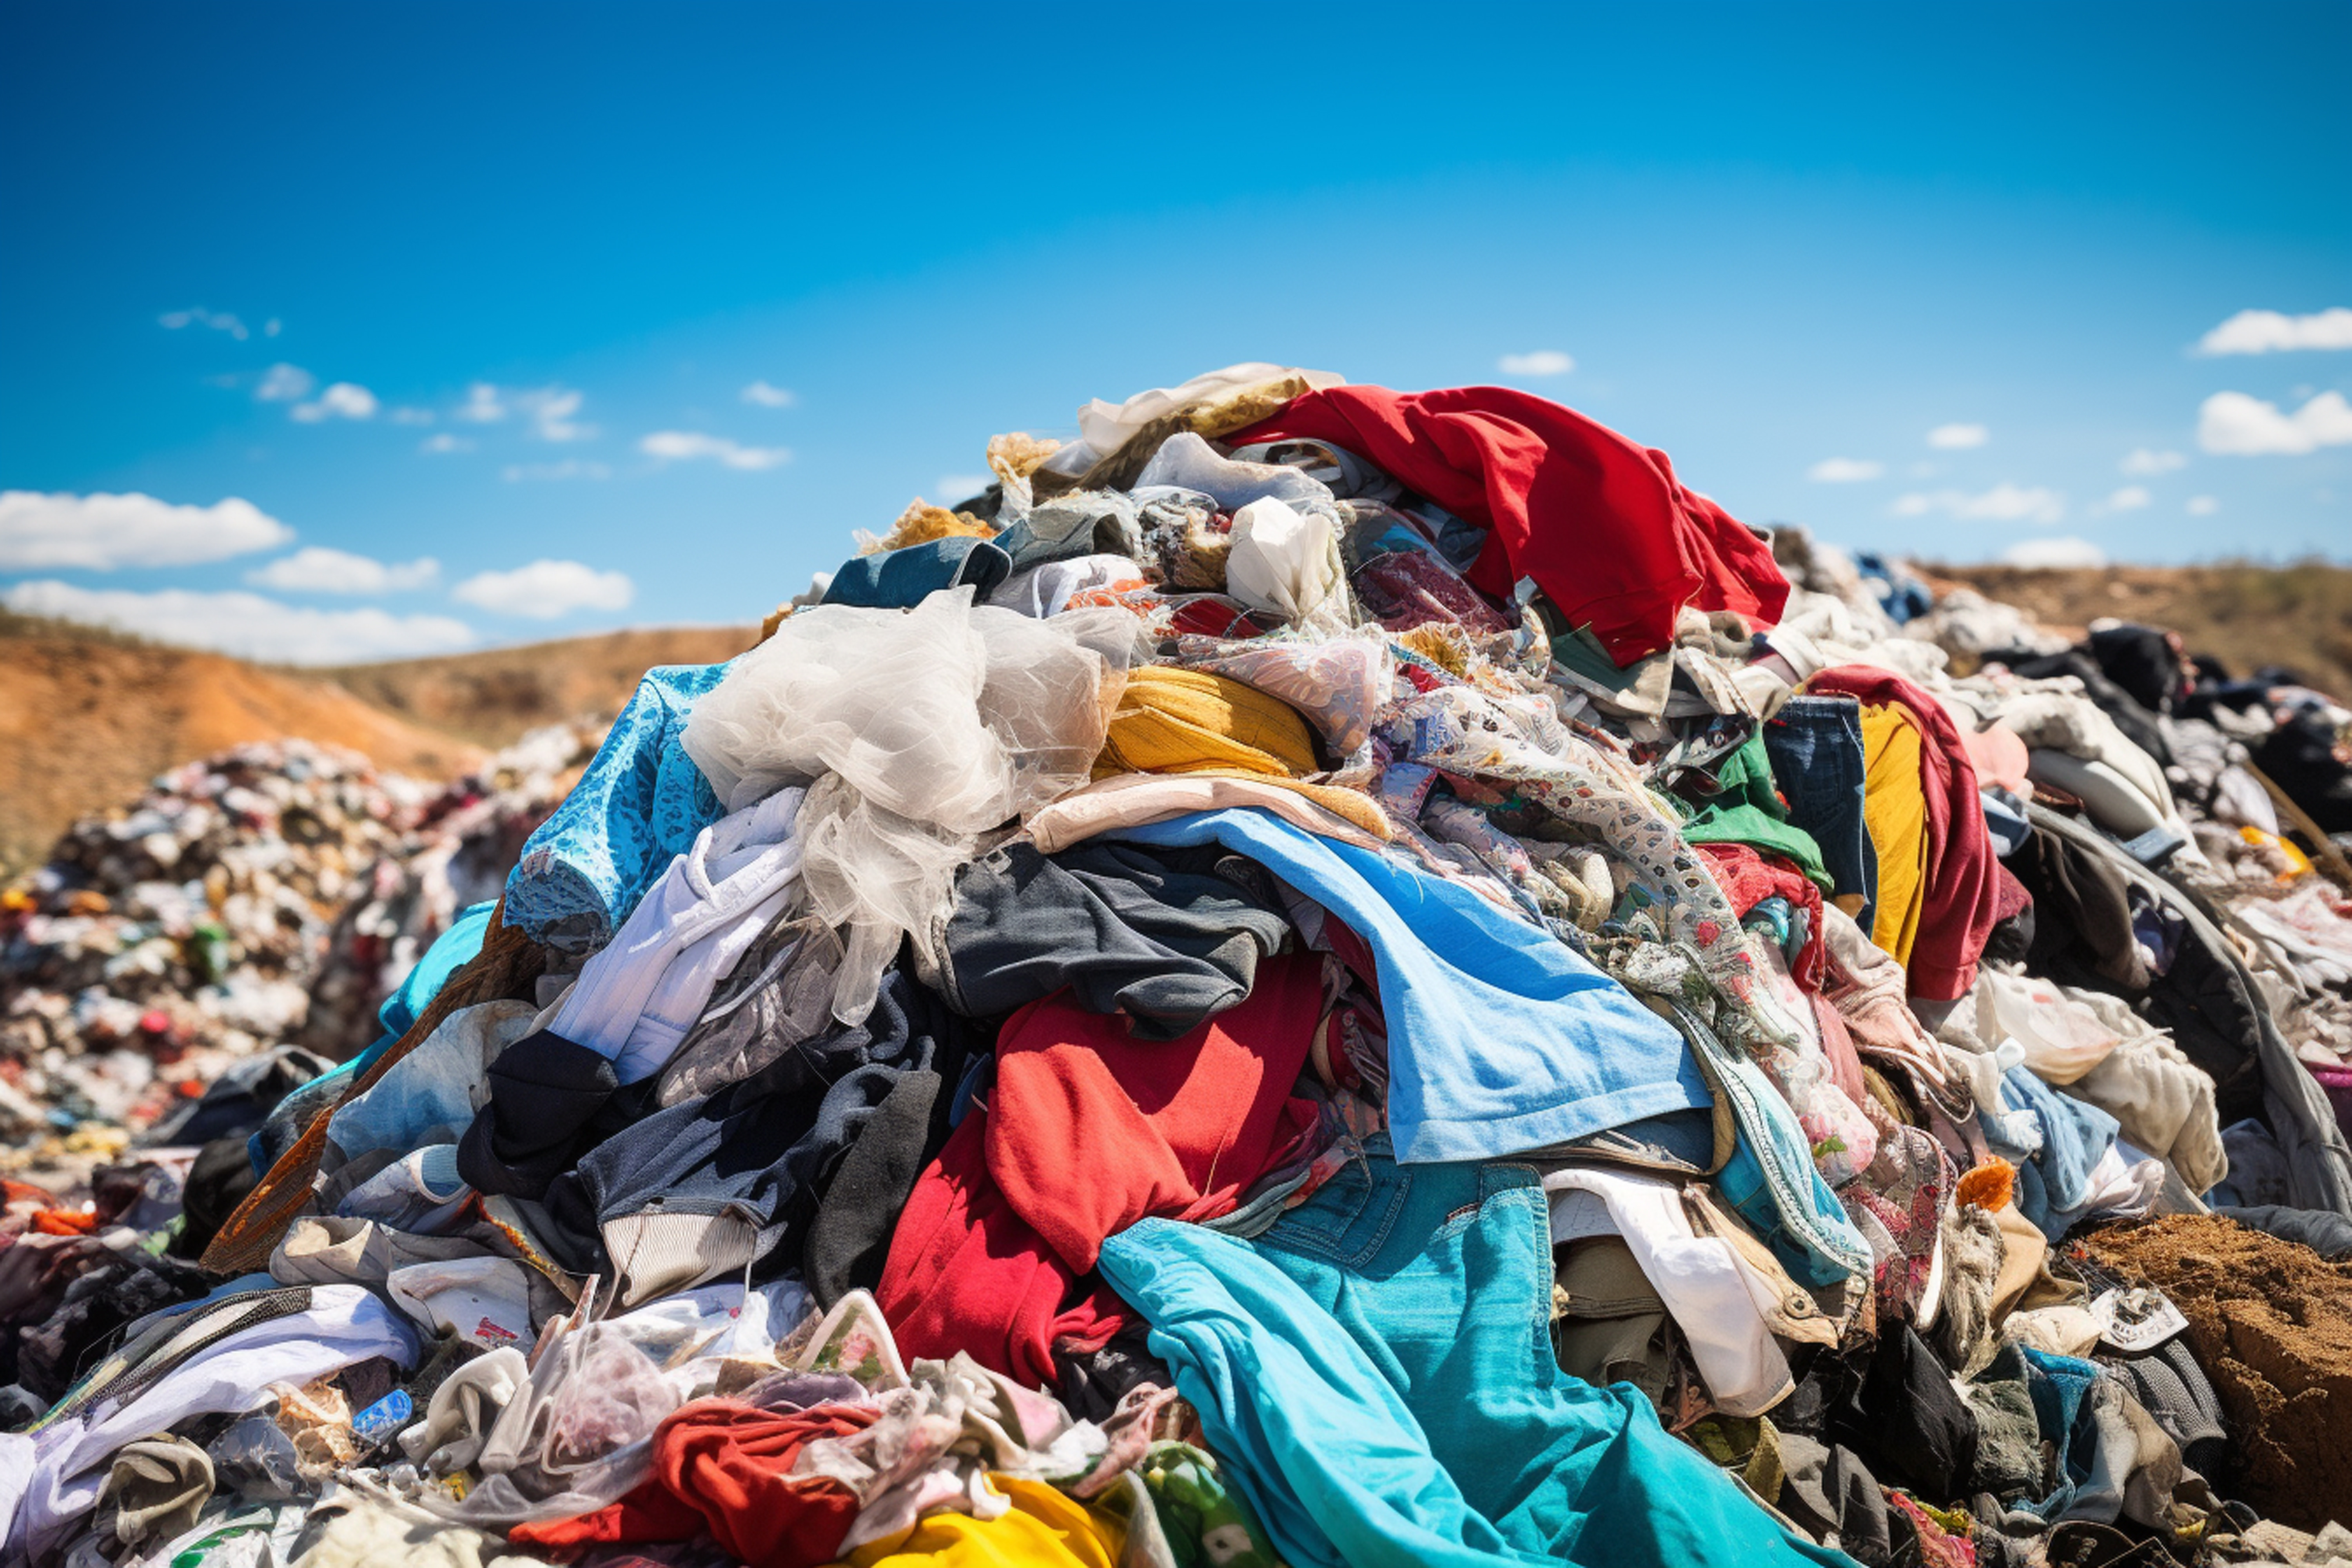 Pile of old clothes on a rubbish heap